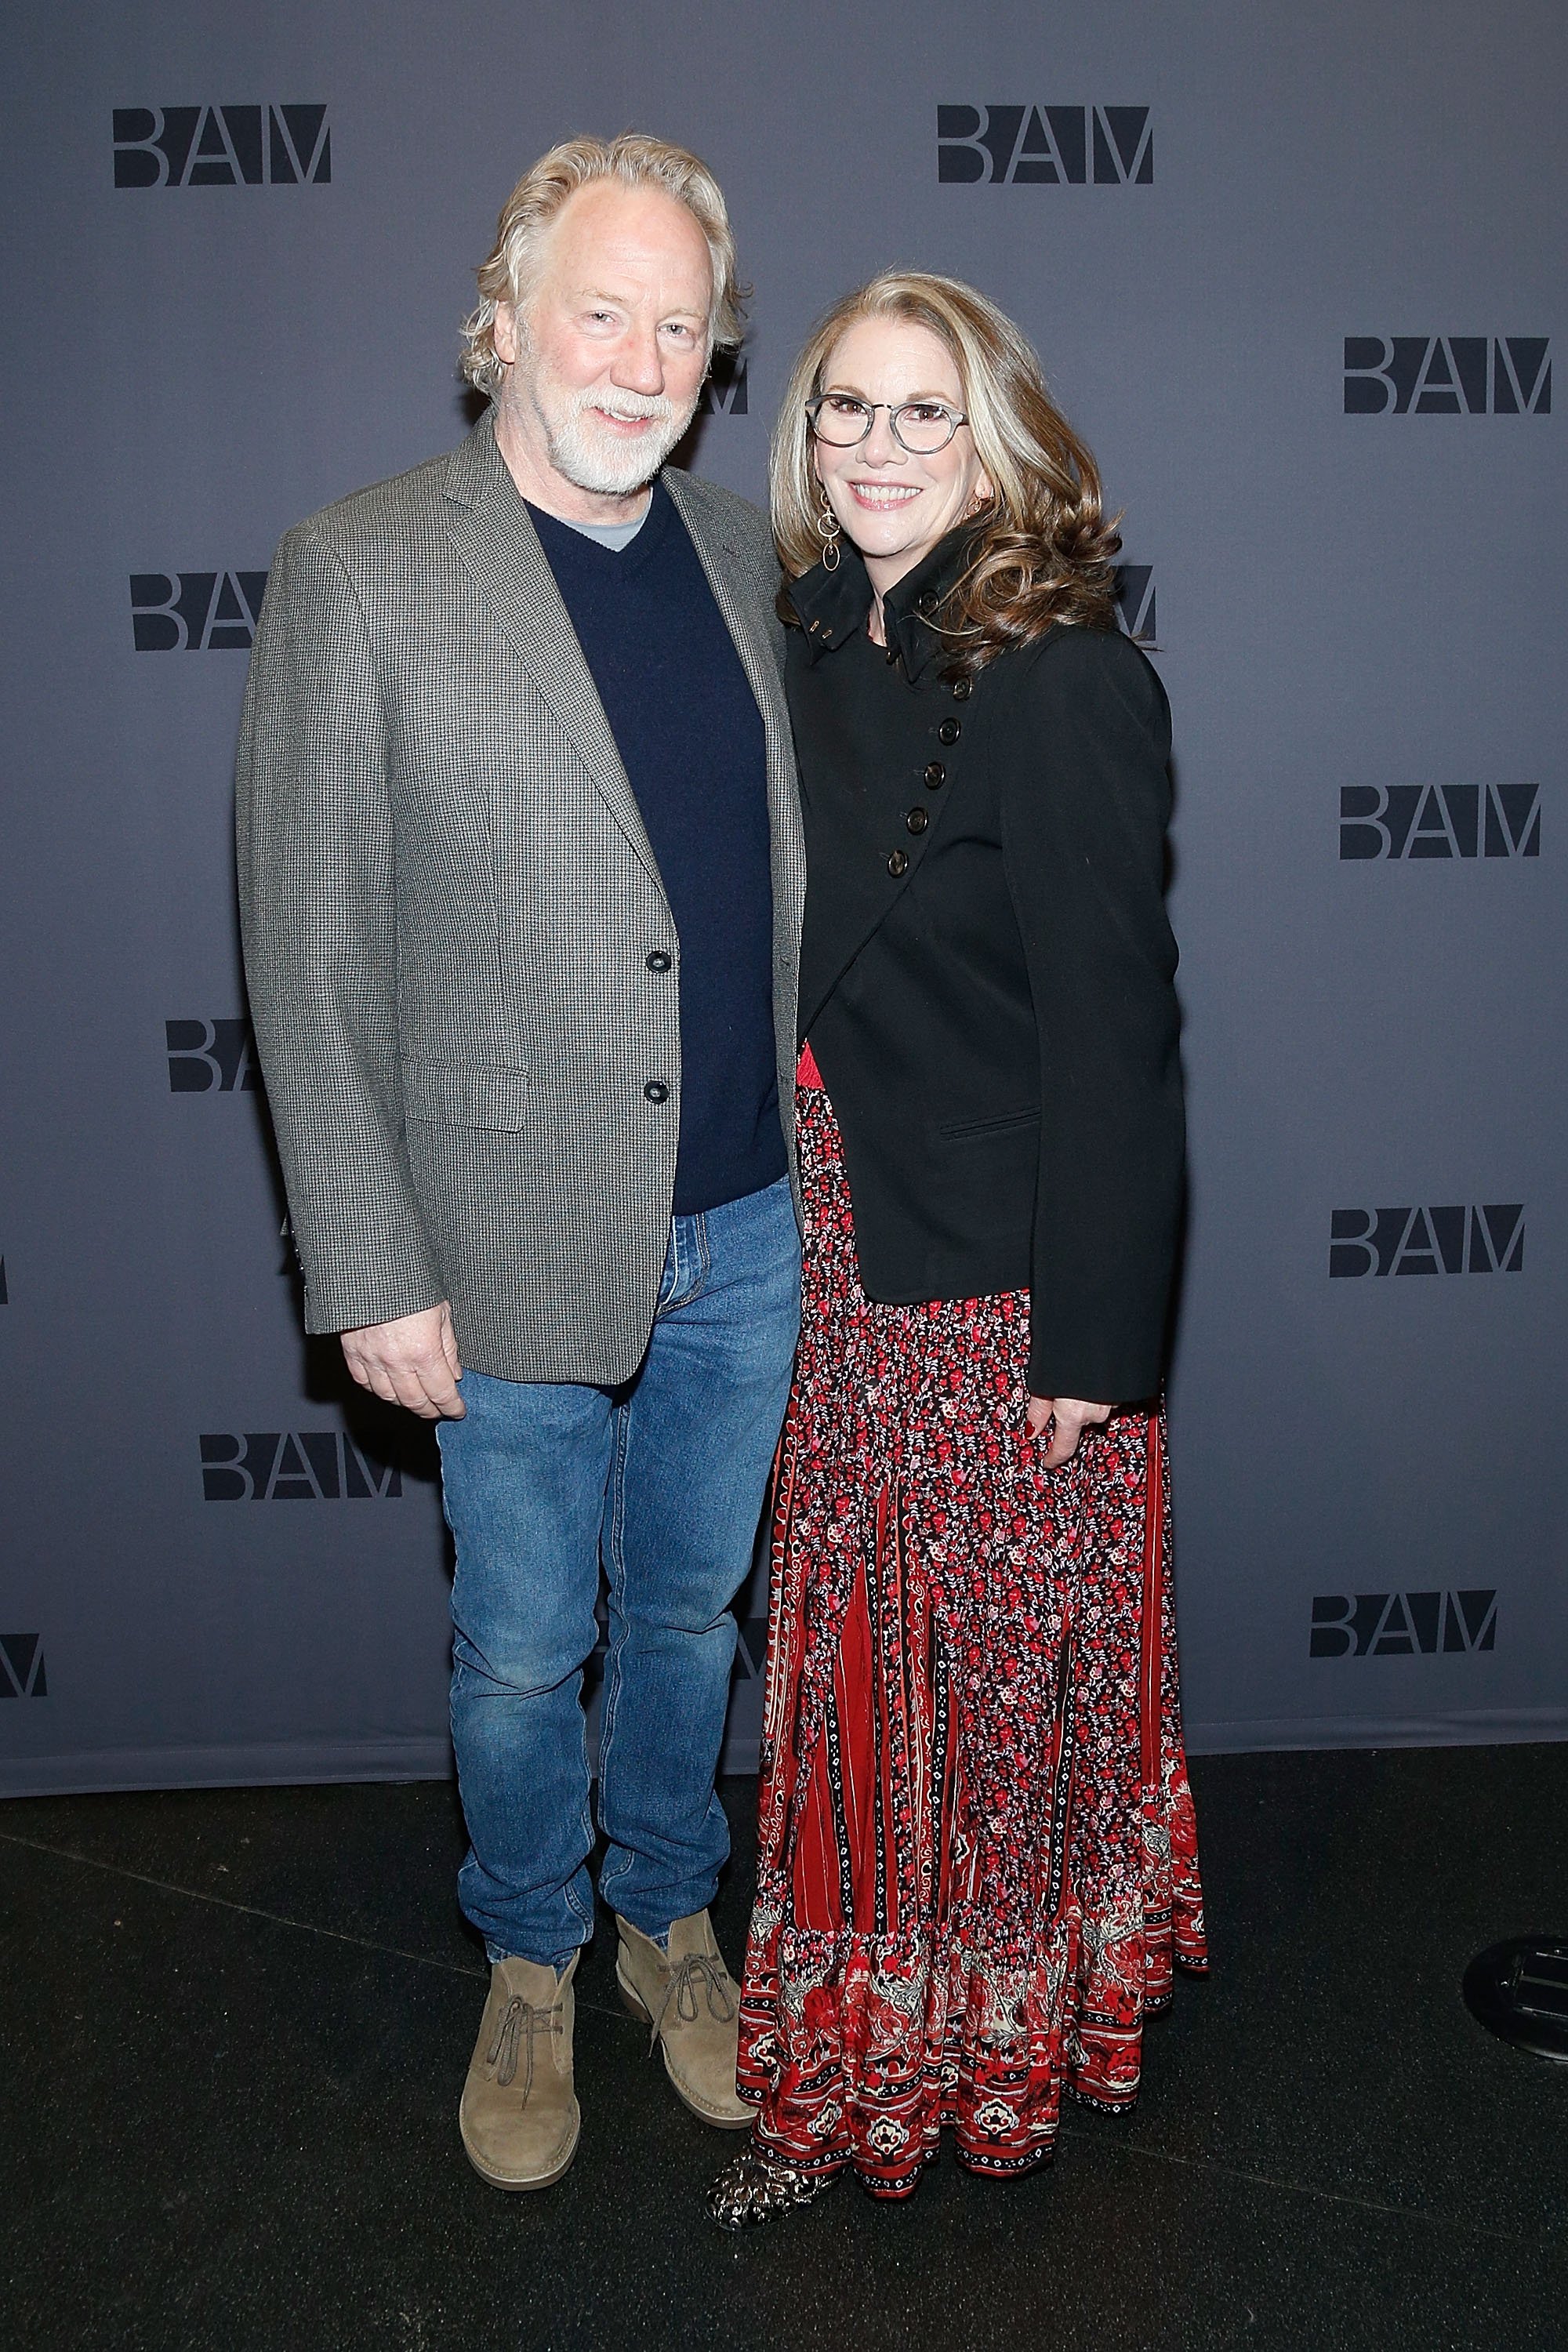 Actor Timothy Busfield and actress Melissa Gilbert attend the opening night party for "Medea" at the BAM Harvey Theater on January 30, 2020 in New York City | Source: Getty Images